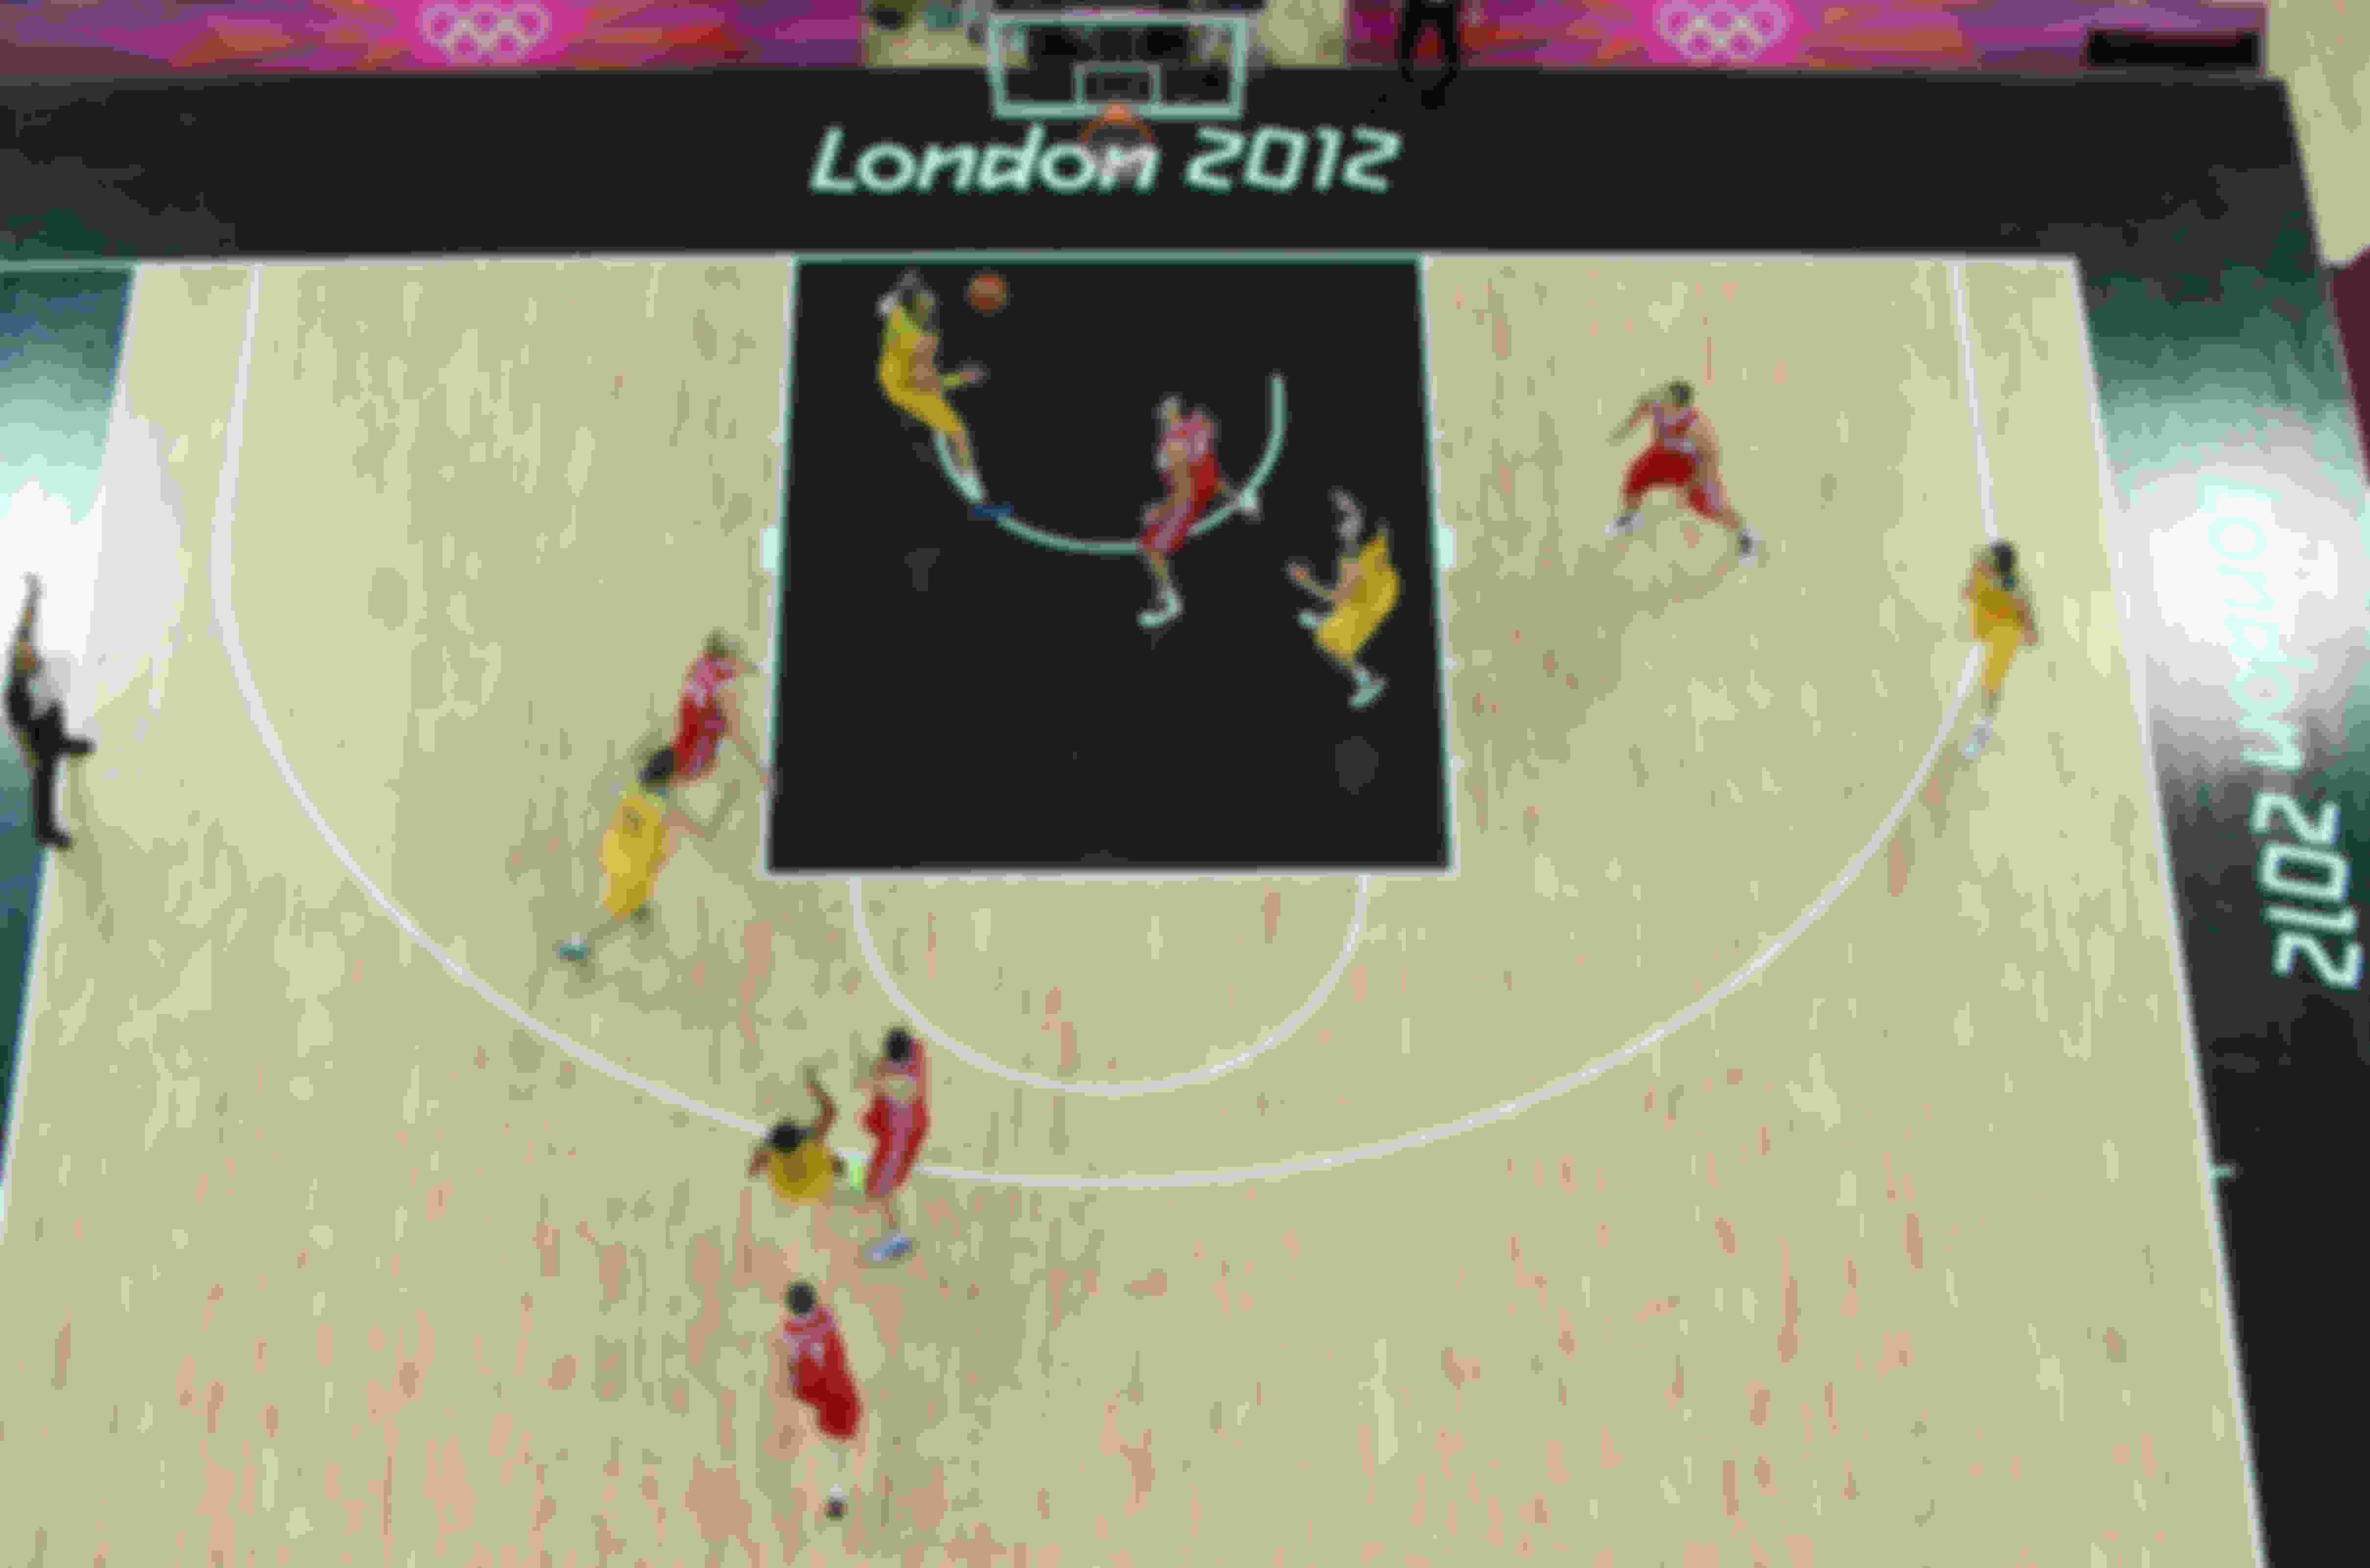 The key in the basketball court is a rectangular painted area inside the three-point arc.